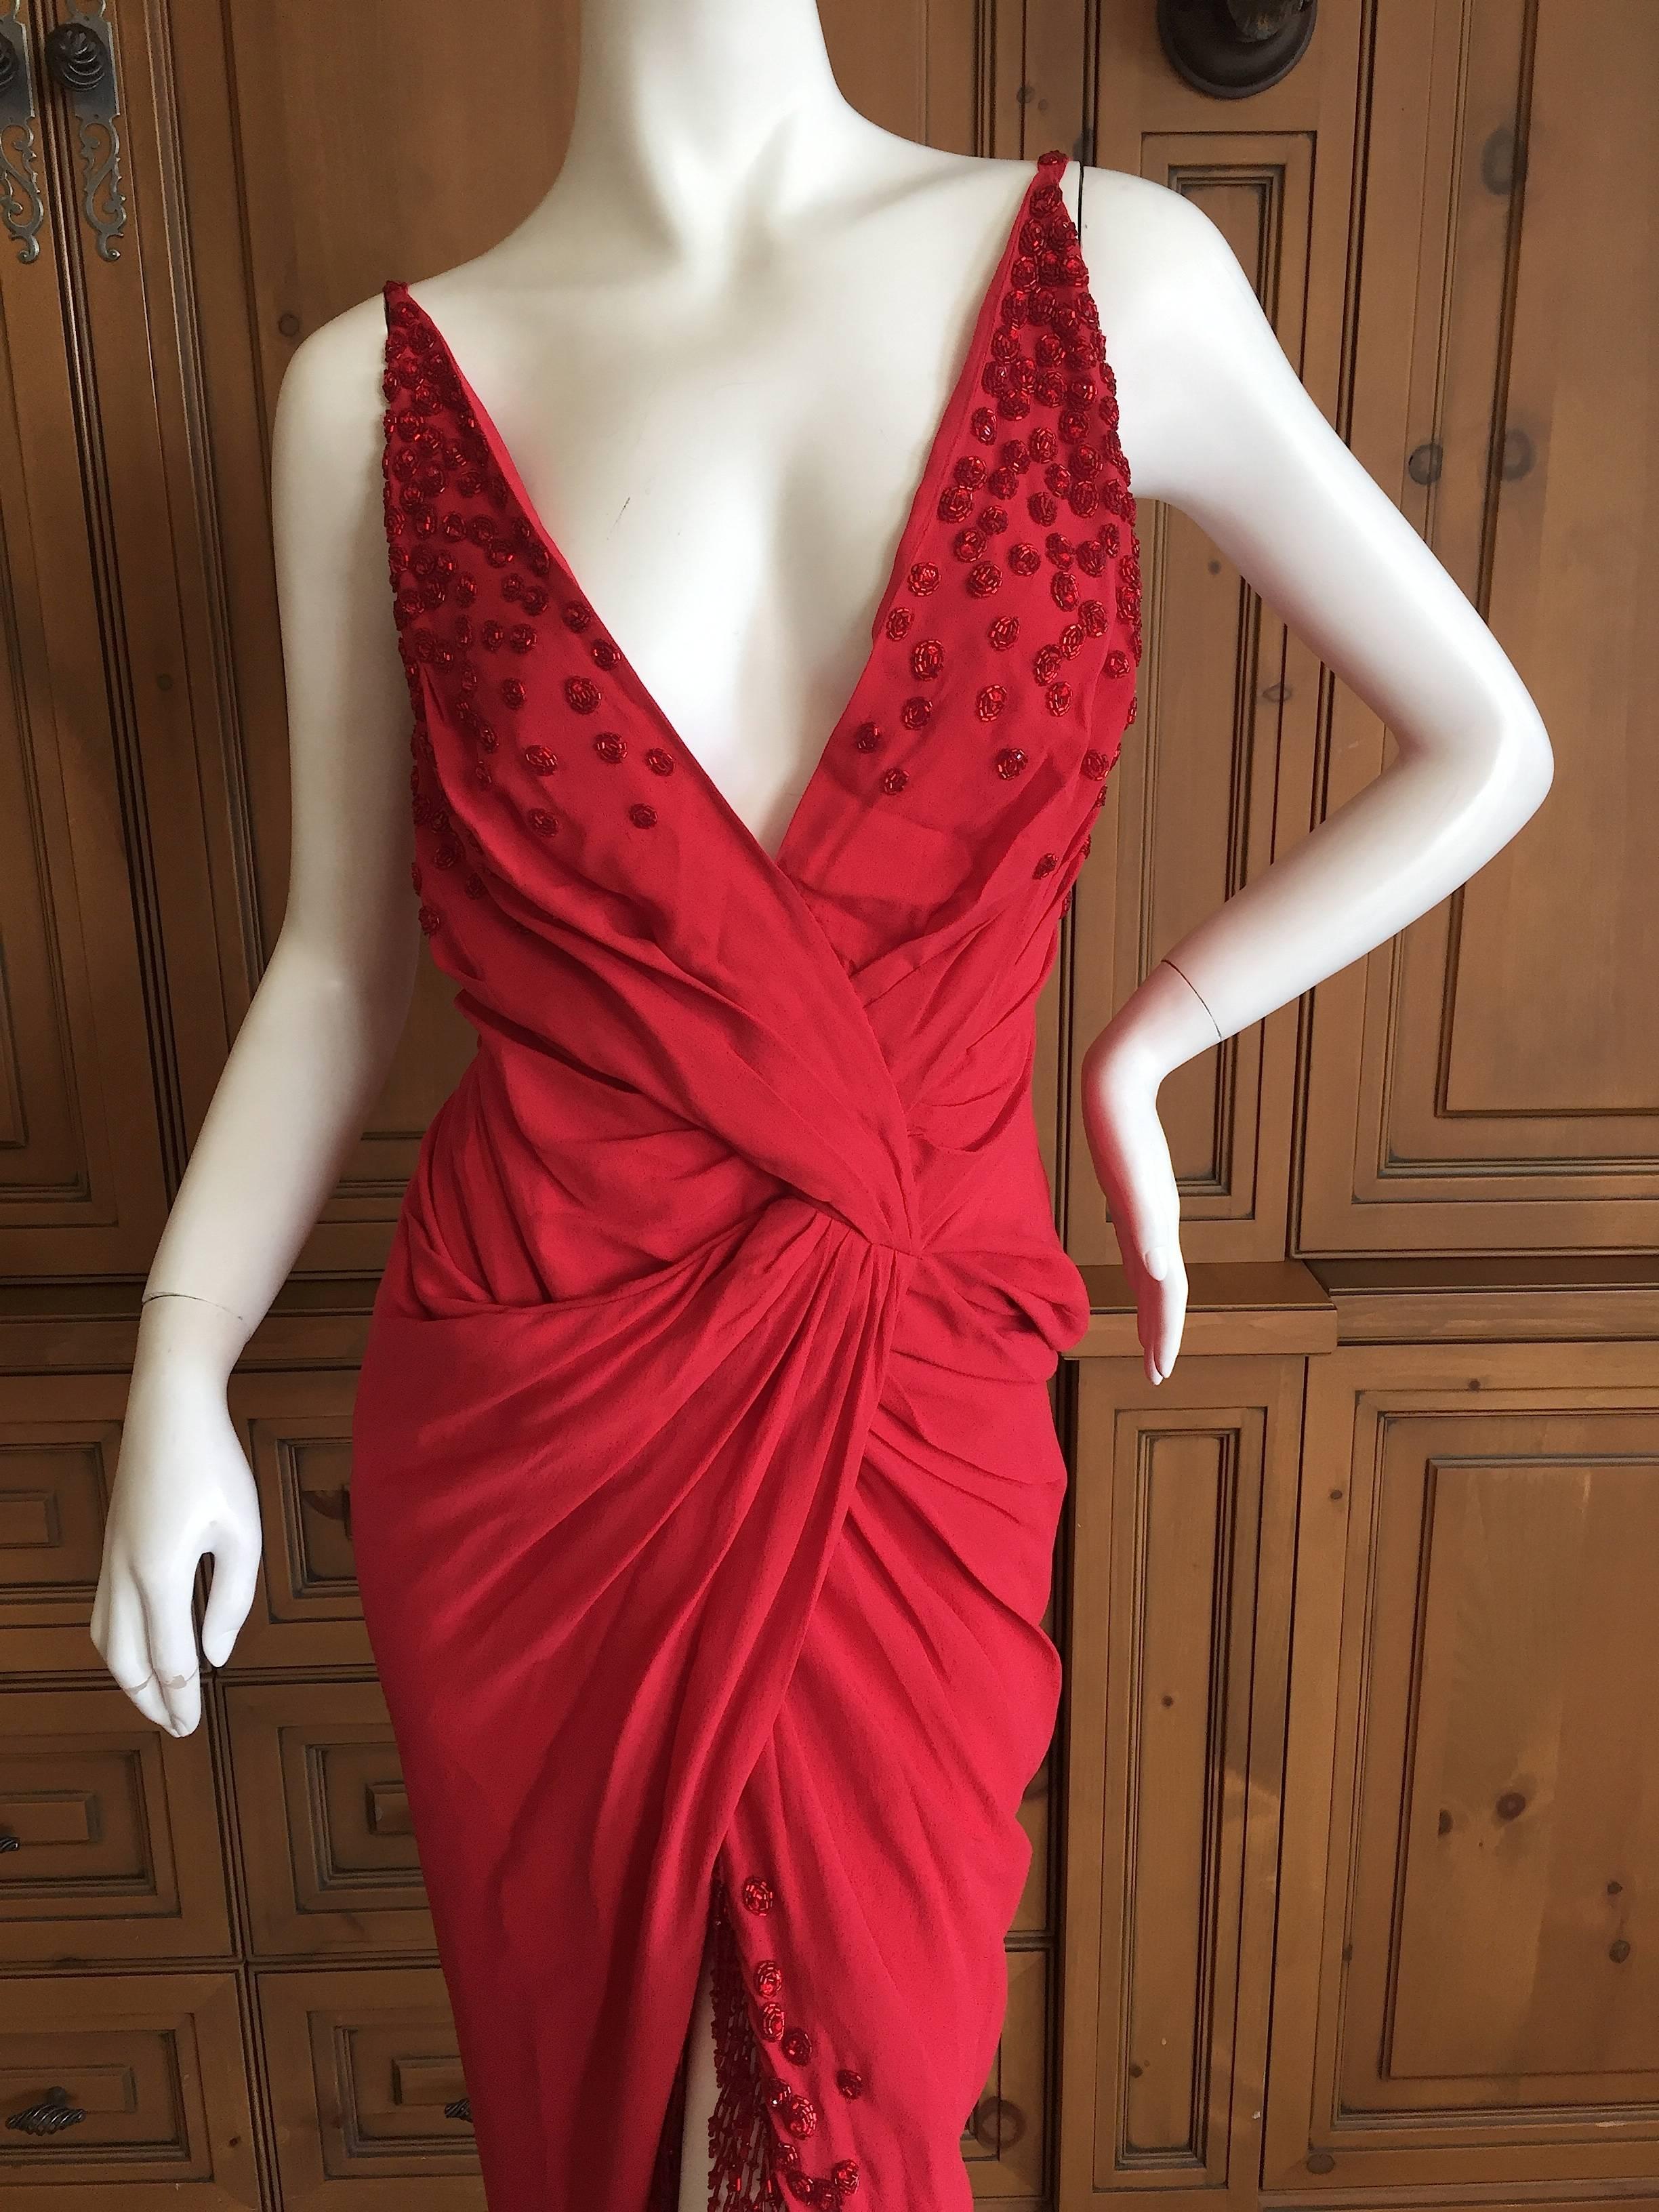 Beautiful red evening dress from John Galliano.
Trimmed in red beaded fringe with bead florettes at the bust.
Photos don't quite capture the charm of this dress, the fringe is really special.
Size 38
Bust 40